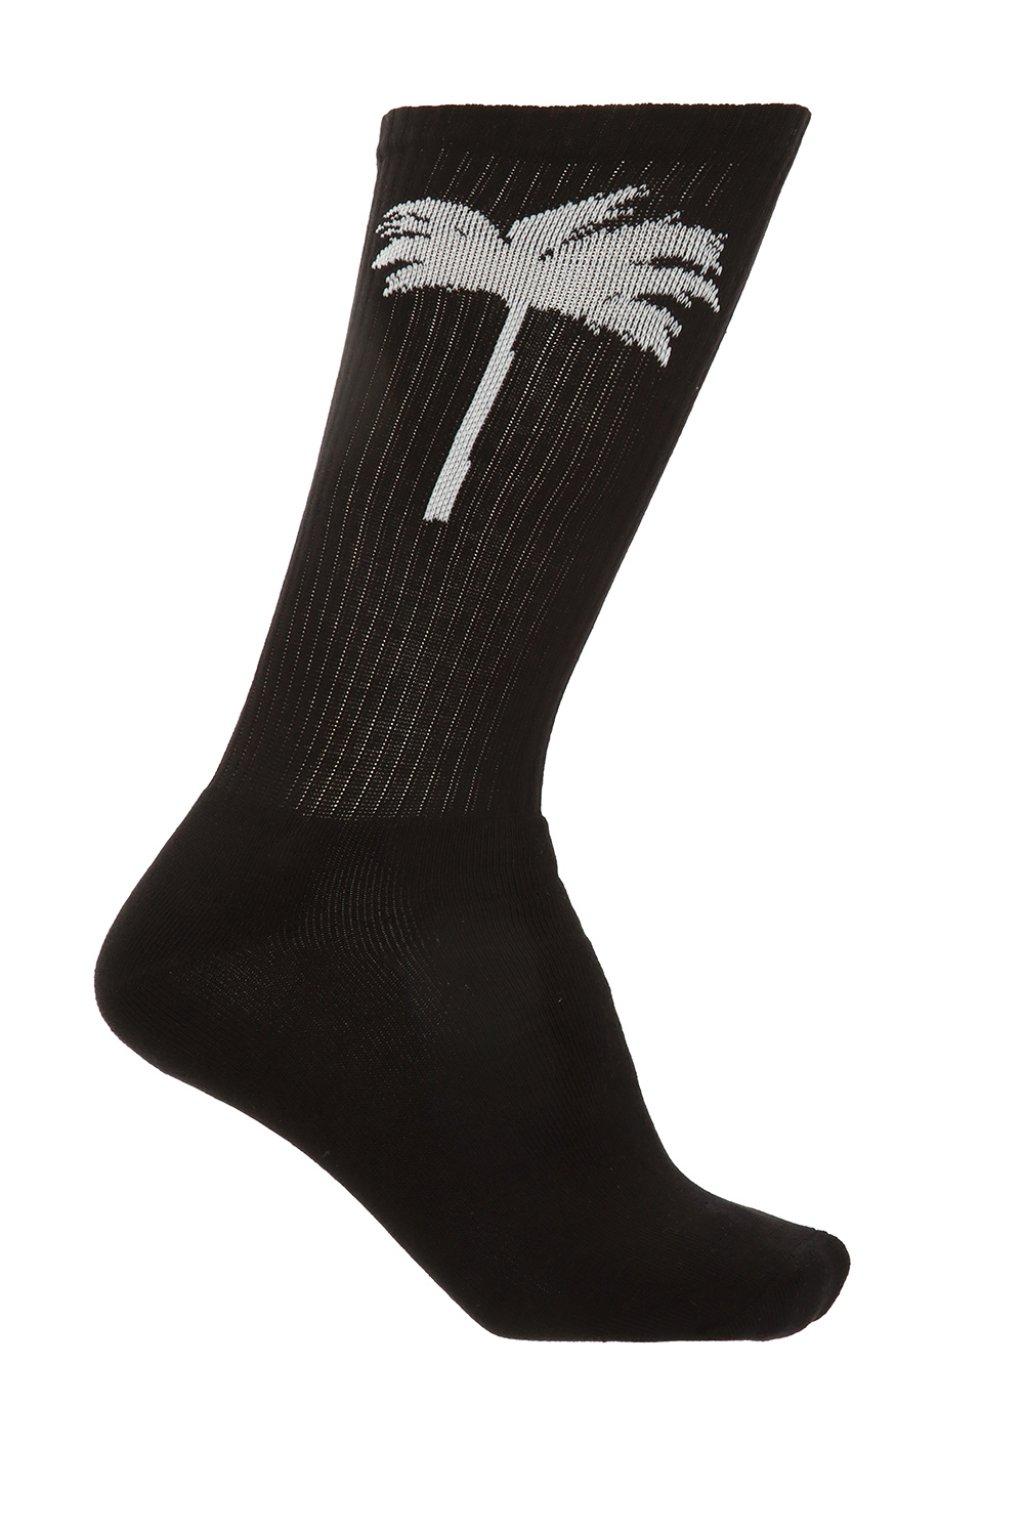 Palm Angels Embroidered Socks in Black for Men - Lyst